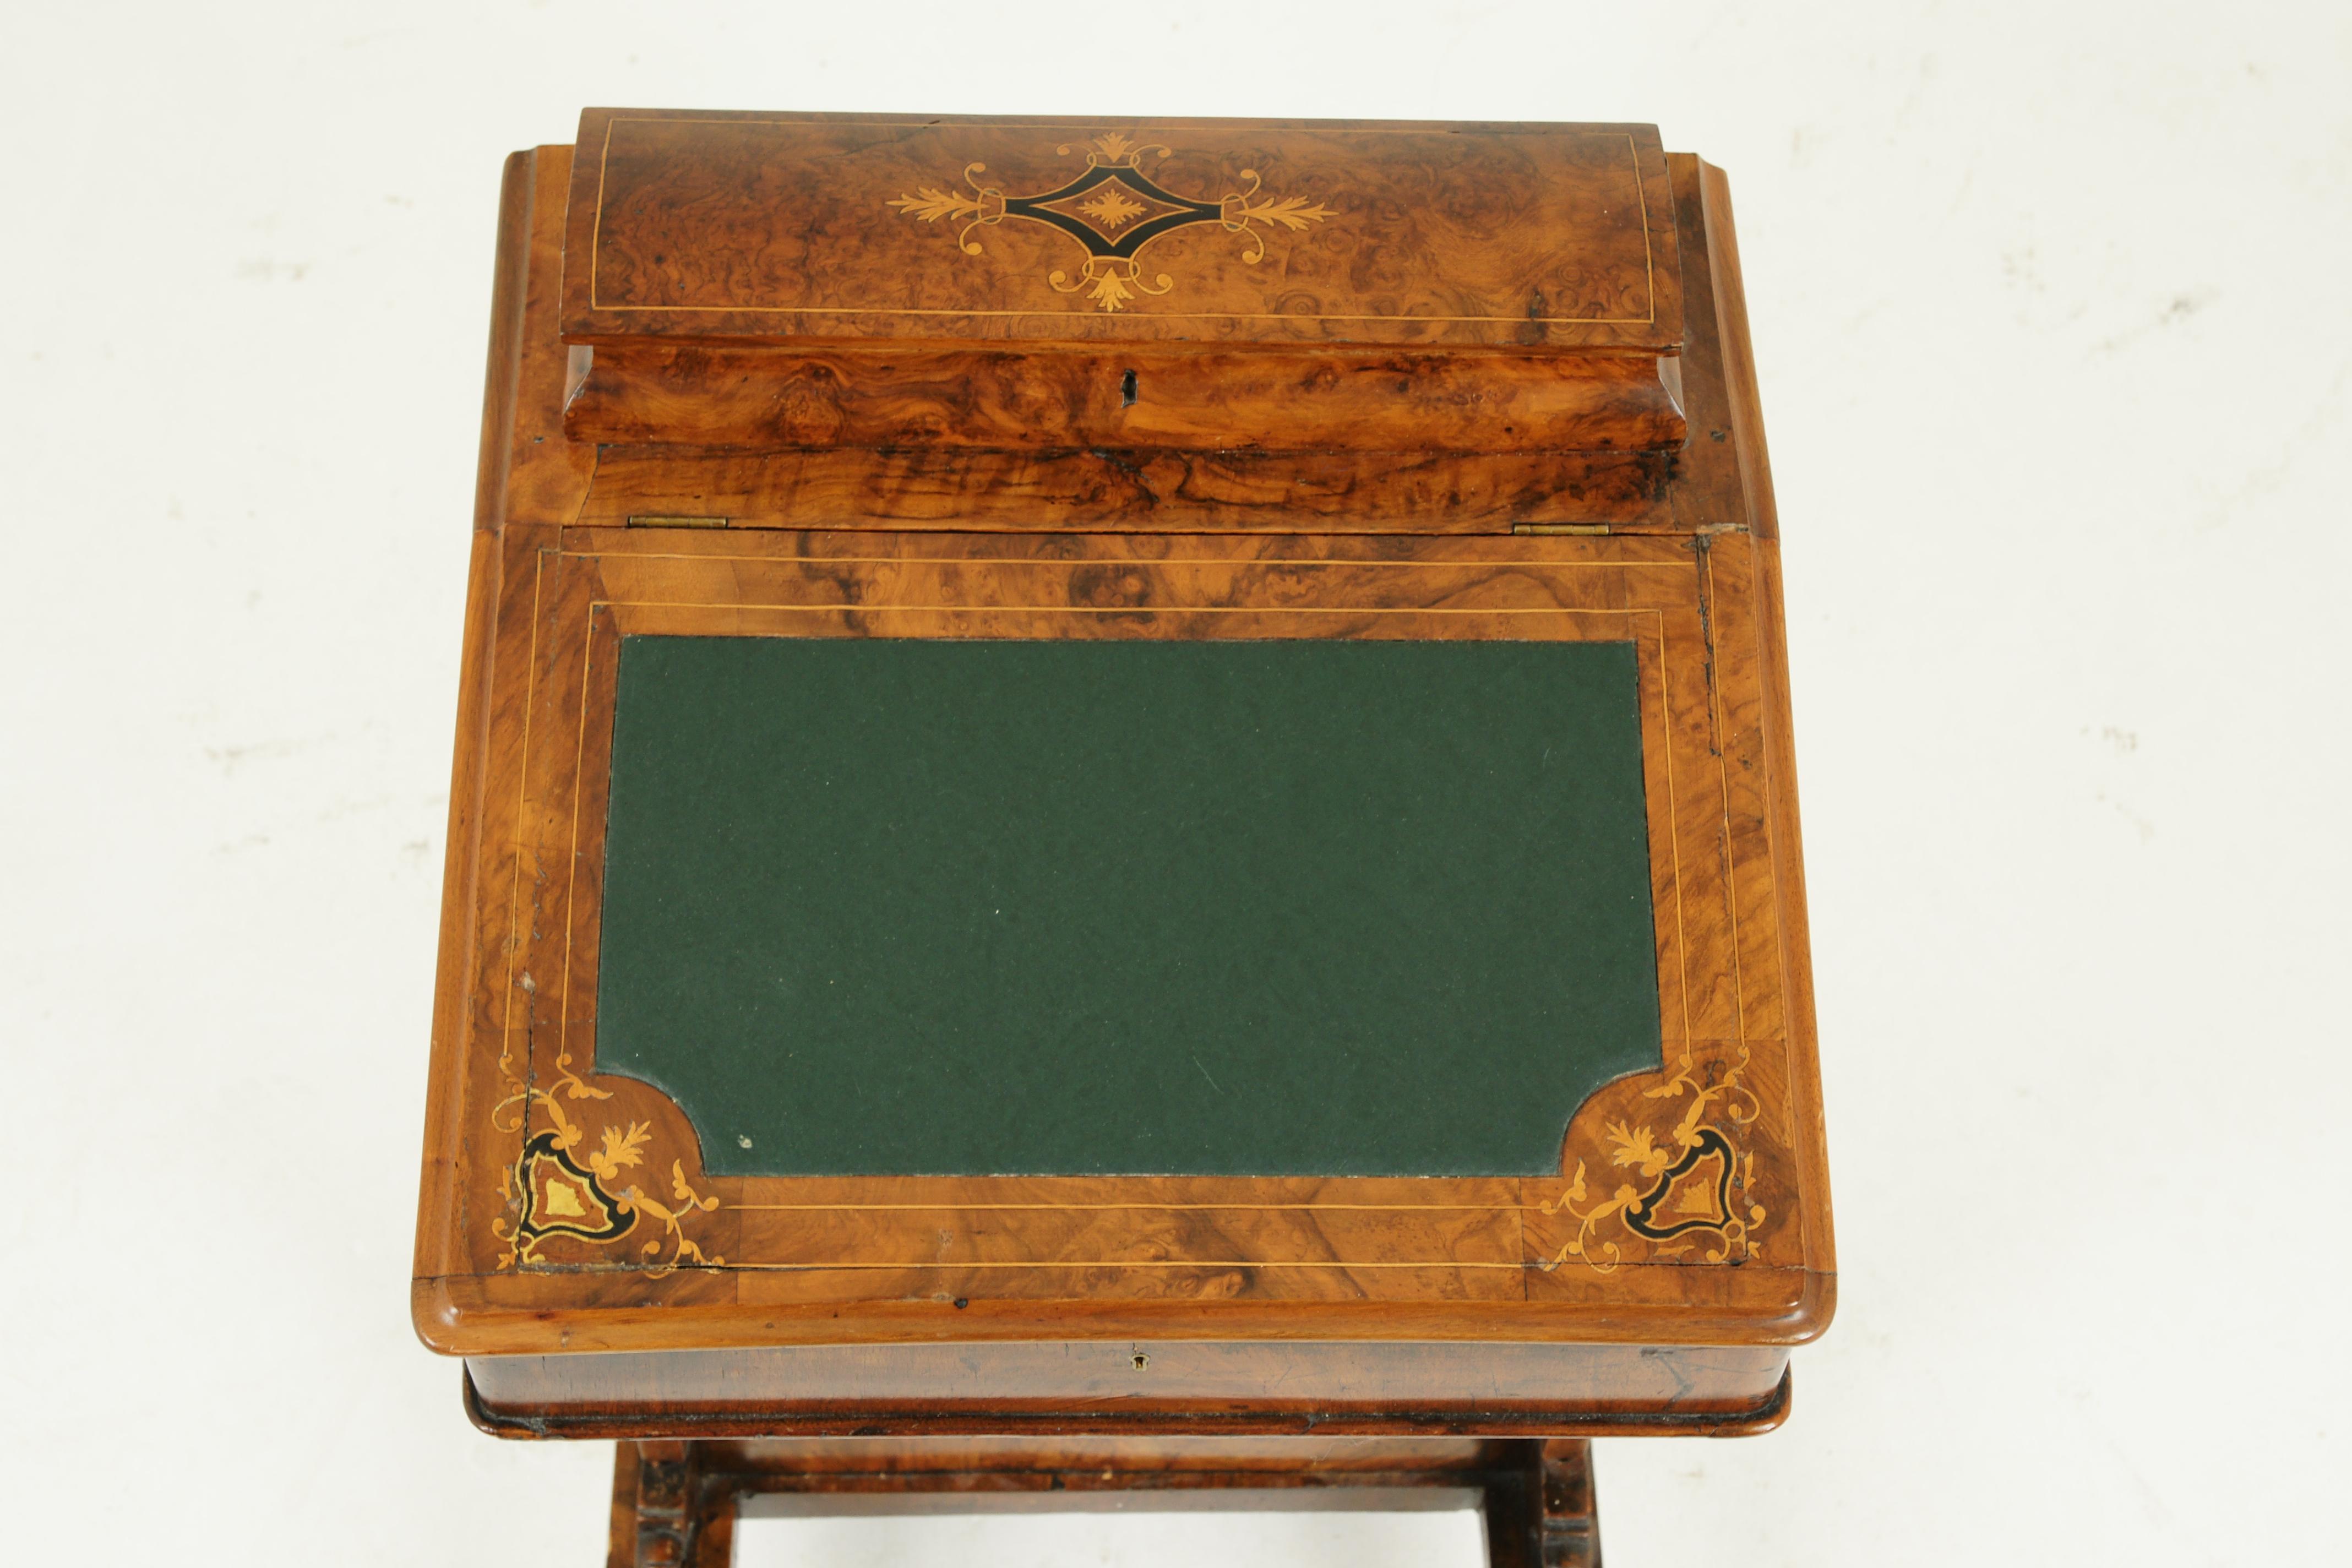 Antique davenport desk, inlaid burr walnut desk, writing desk, Victorian, Scotland, 1870, antique furniture

Scotland, 1870
Solid walnut and veneers
Inlaid lift top with storage space beneath
Green leather insert to the slant top
Opens to reveal